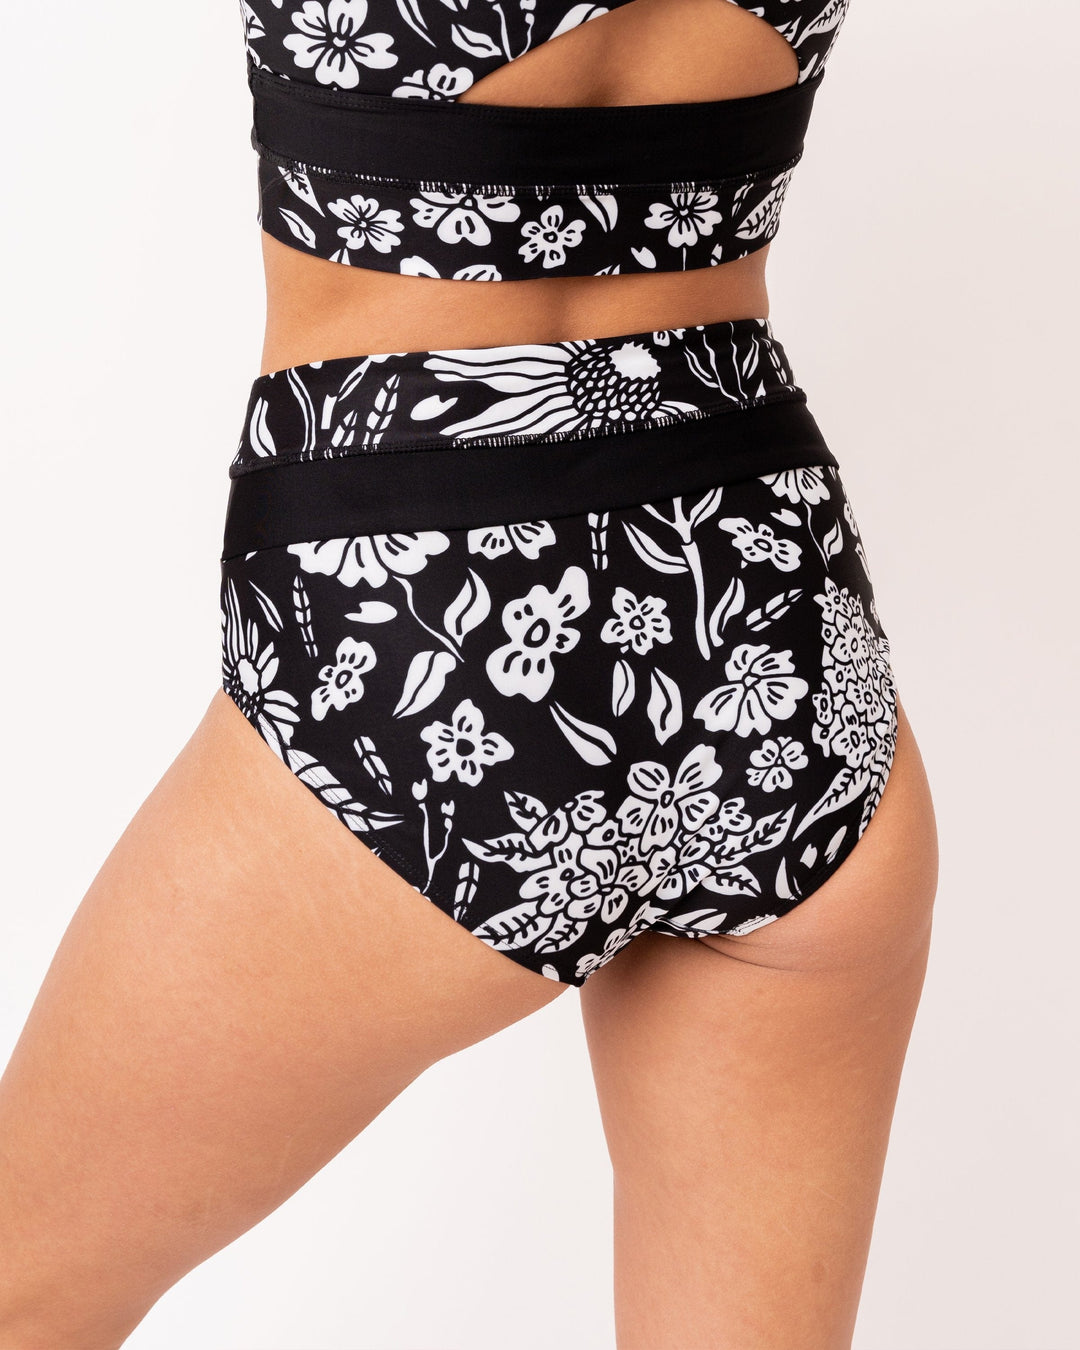 Back view studio image of black and white floral patterned swimsuit bottoms.